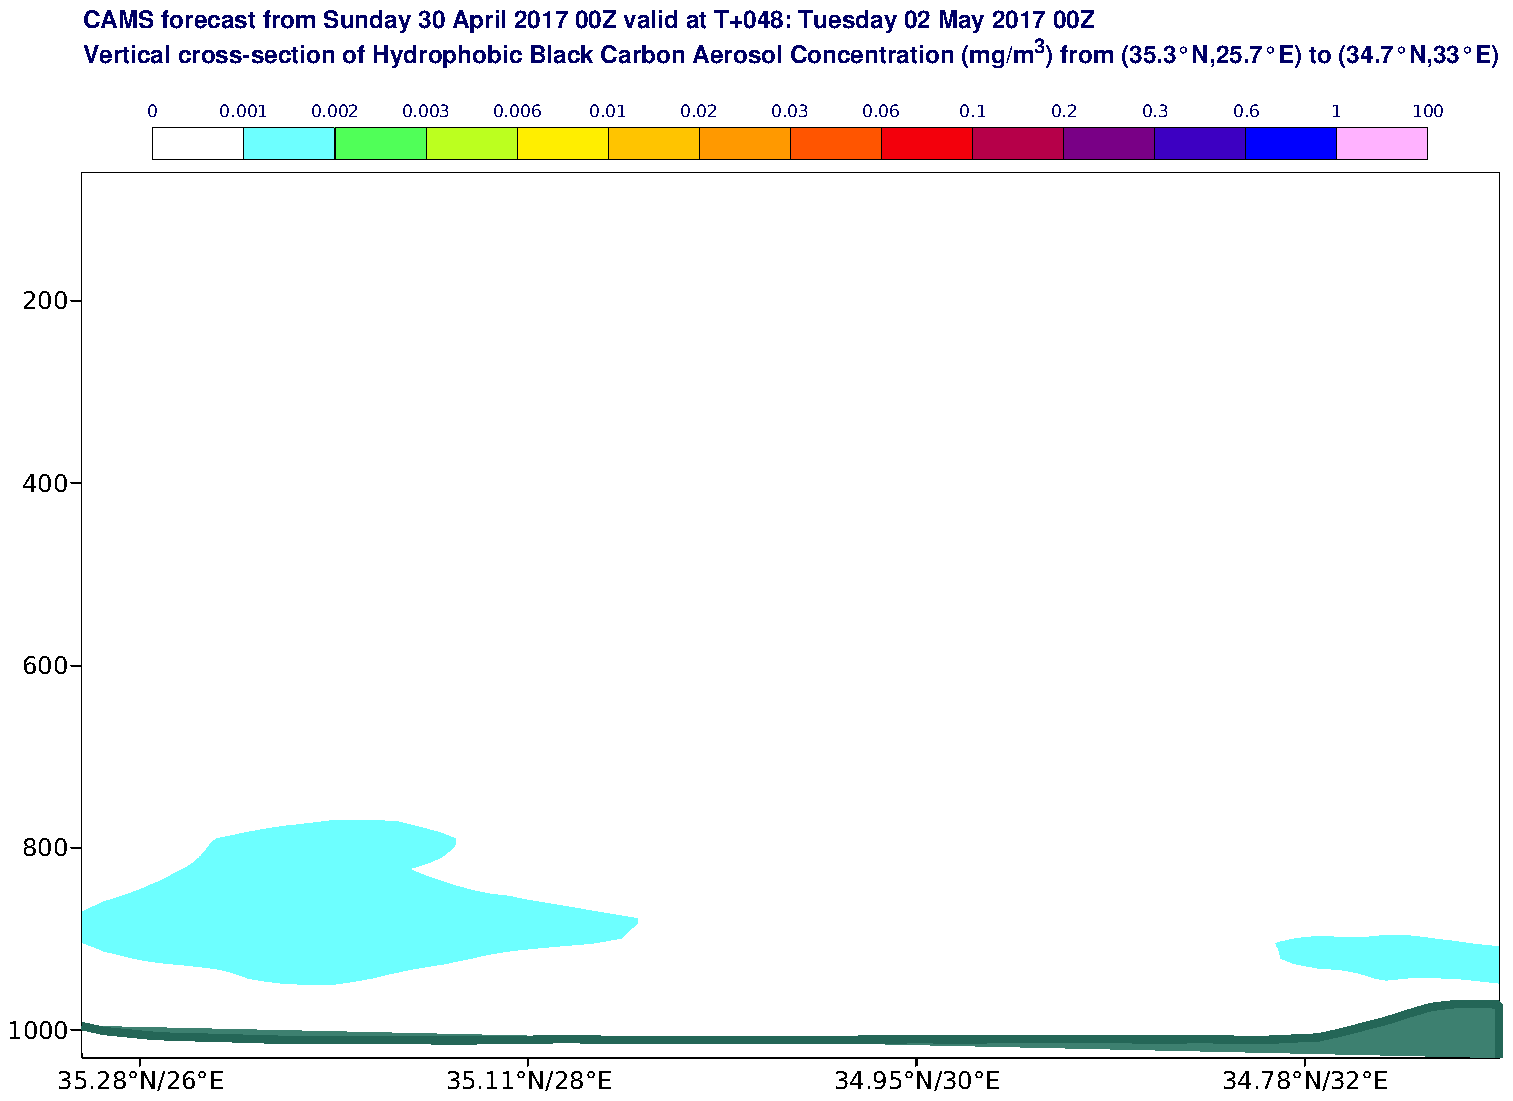 Vertical cross-section of Hydrophobic Black Carbon Aerosol Concentration (mg/m3) valid at T48 - 2017-05-02 00:00